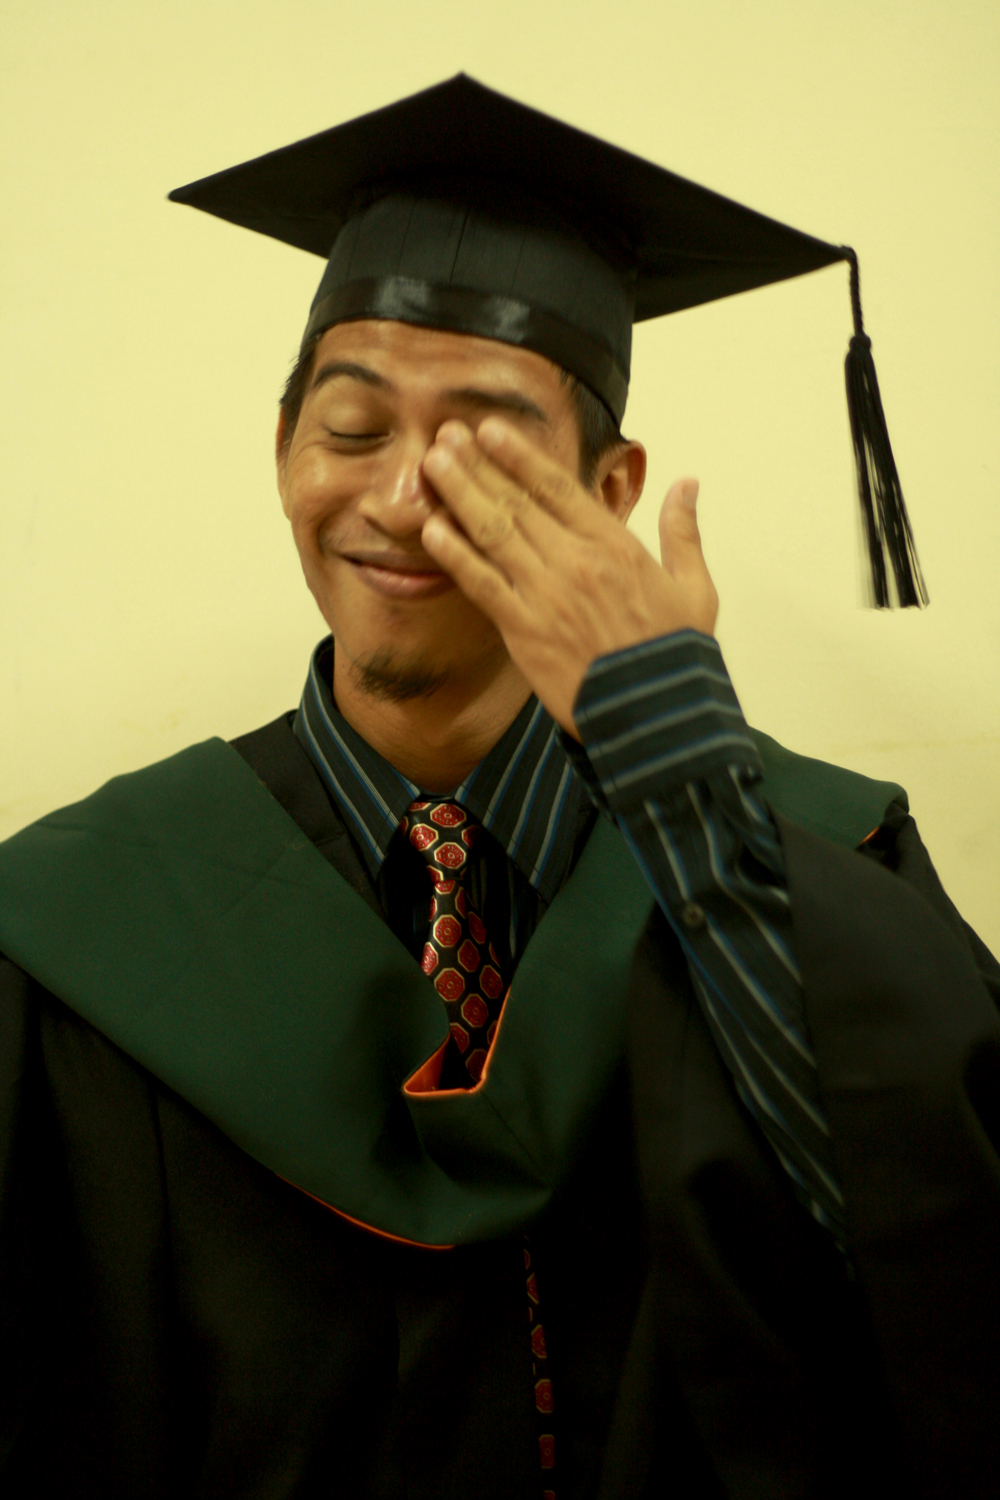 a man in a cap and gown saluting to someone